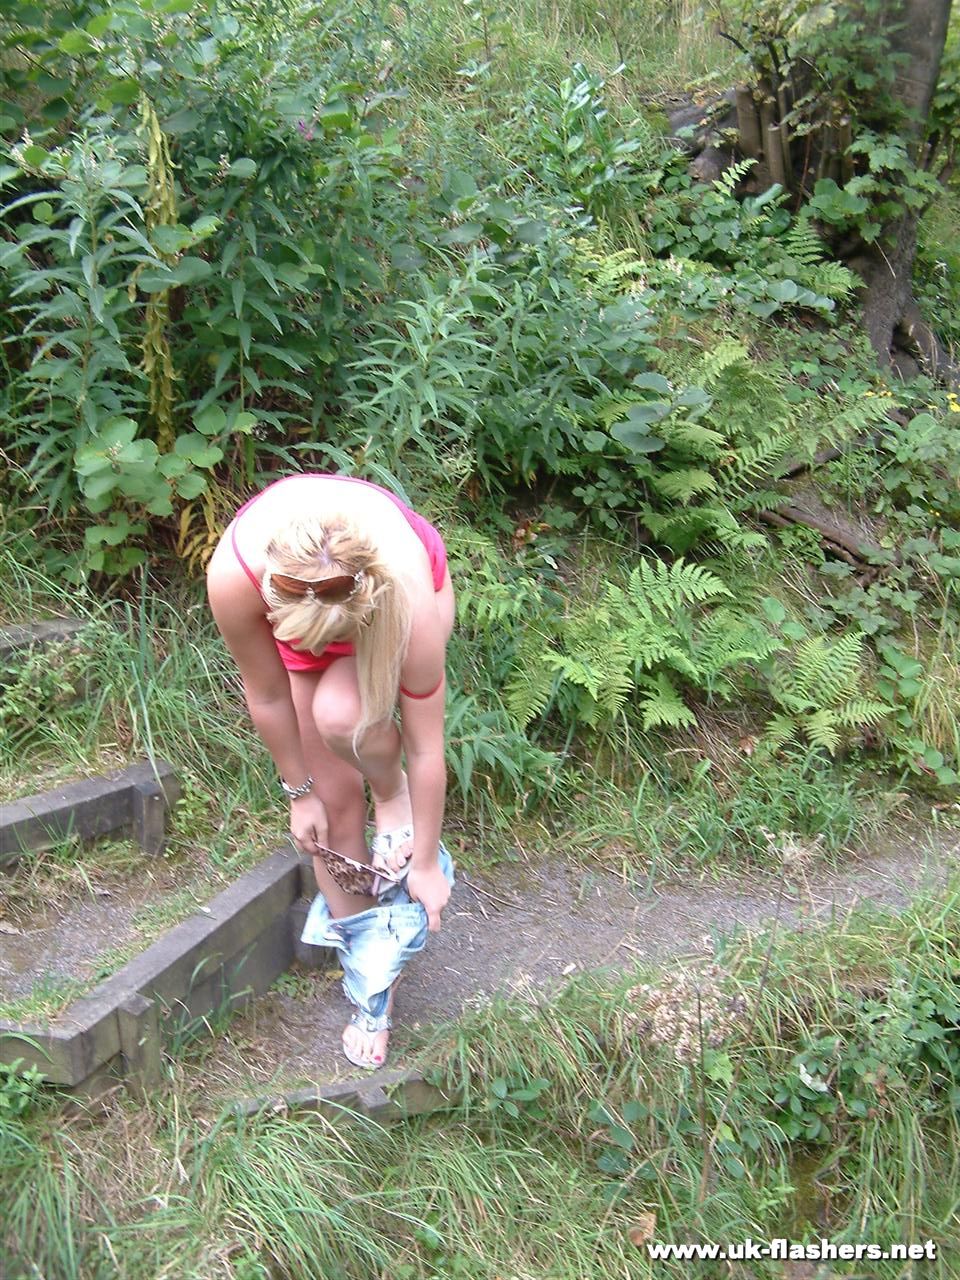 Overweight UK female with blonde hair strips naked on a popular walking trails ポルノ写真 #428197329 | UK Flashers Pics, Lena Leigh, Public, モバイルポルノ